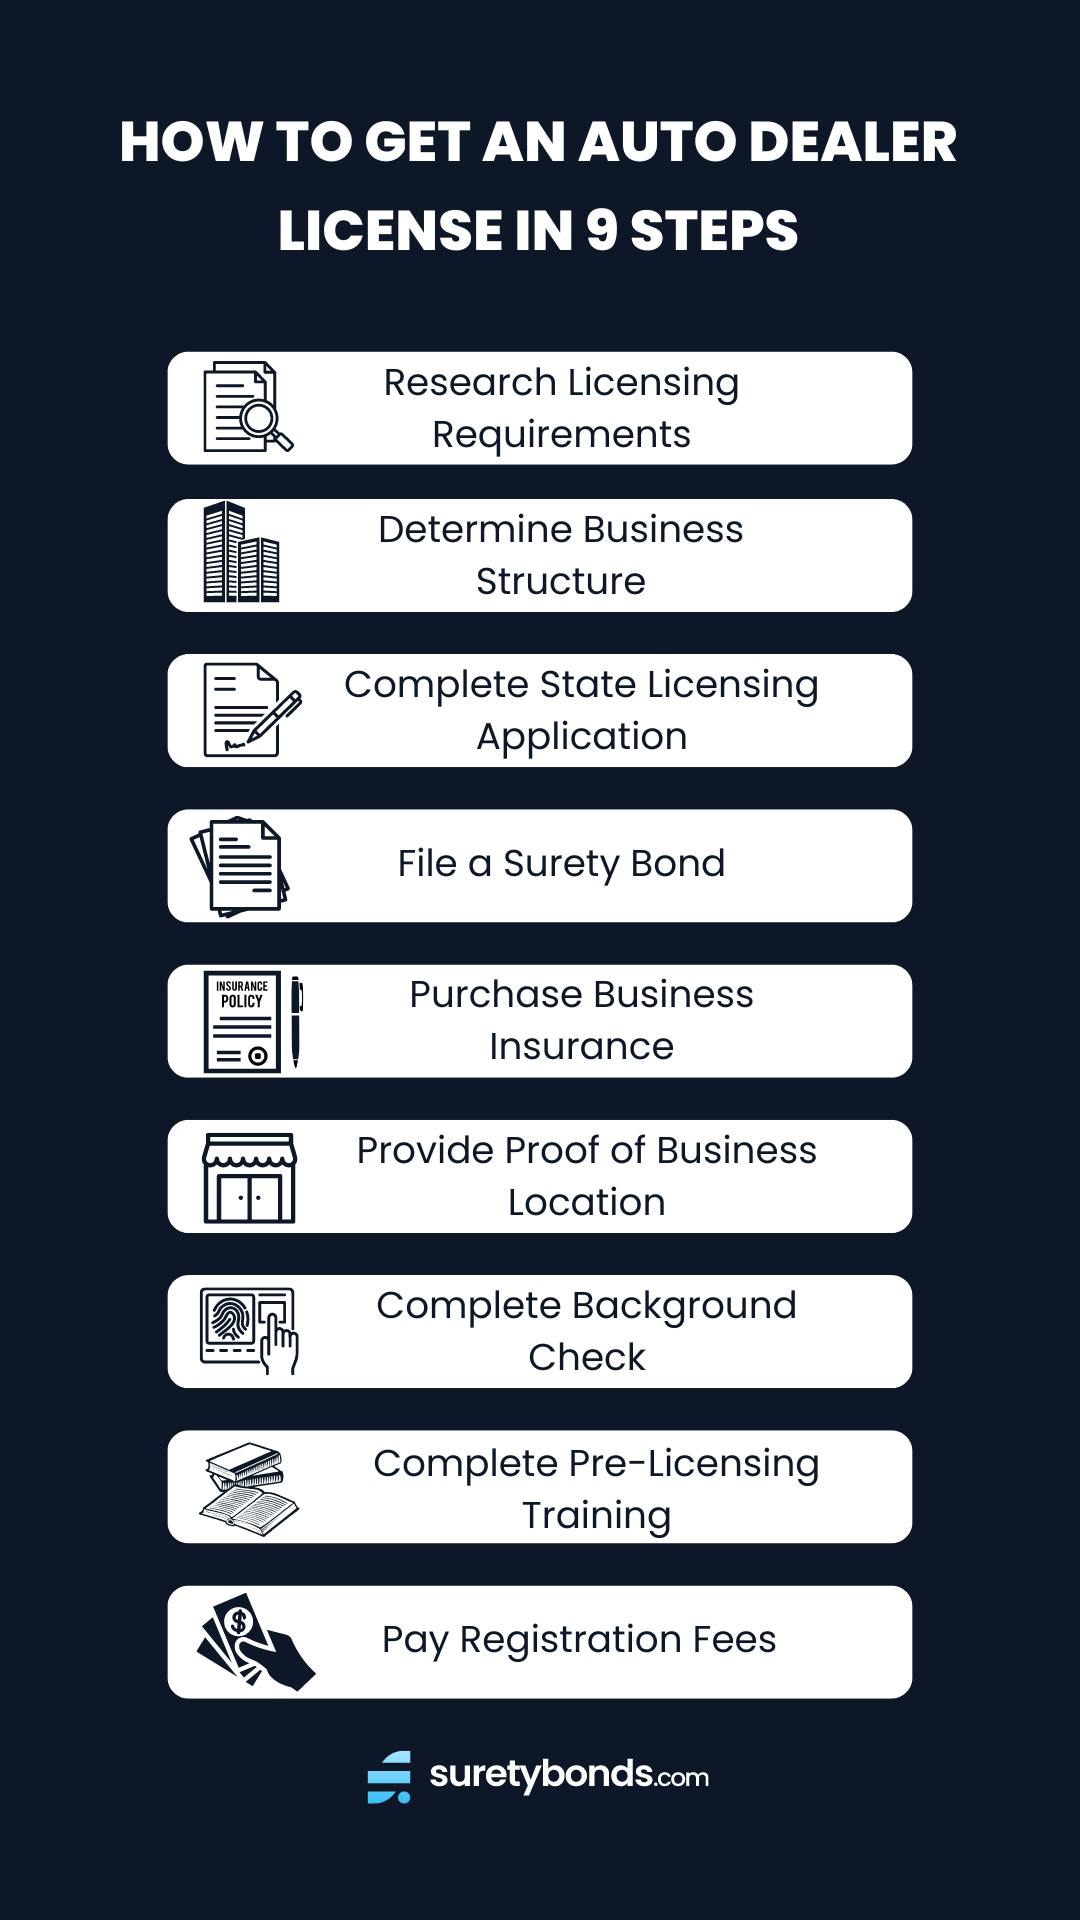 How to Get an Auto Dealer License in 9 Steps graphic